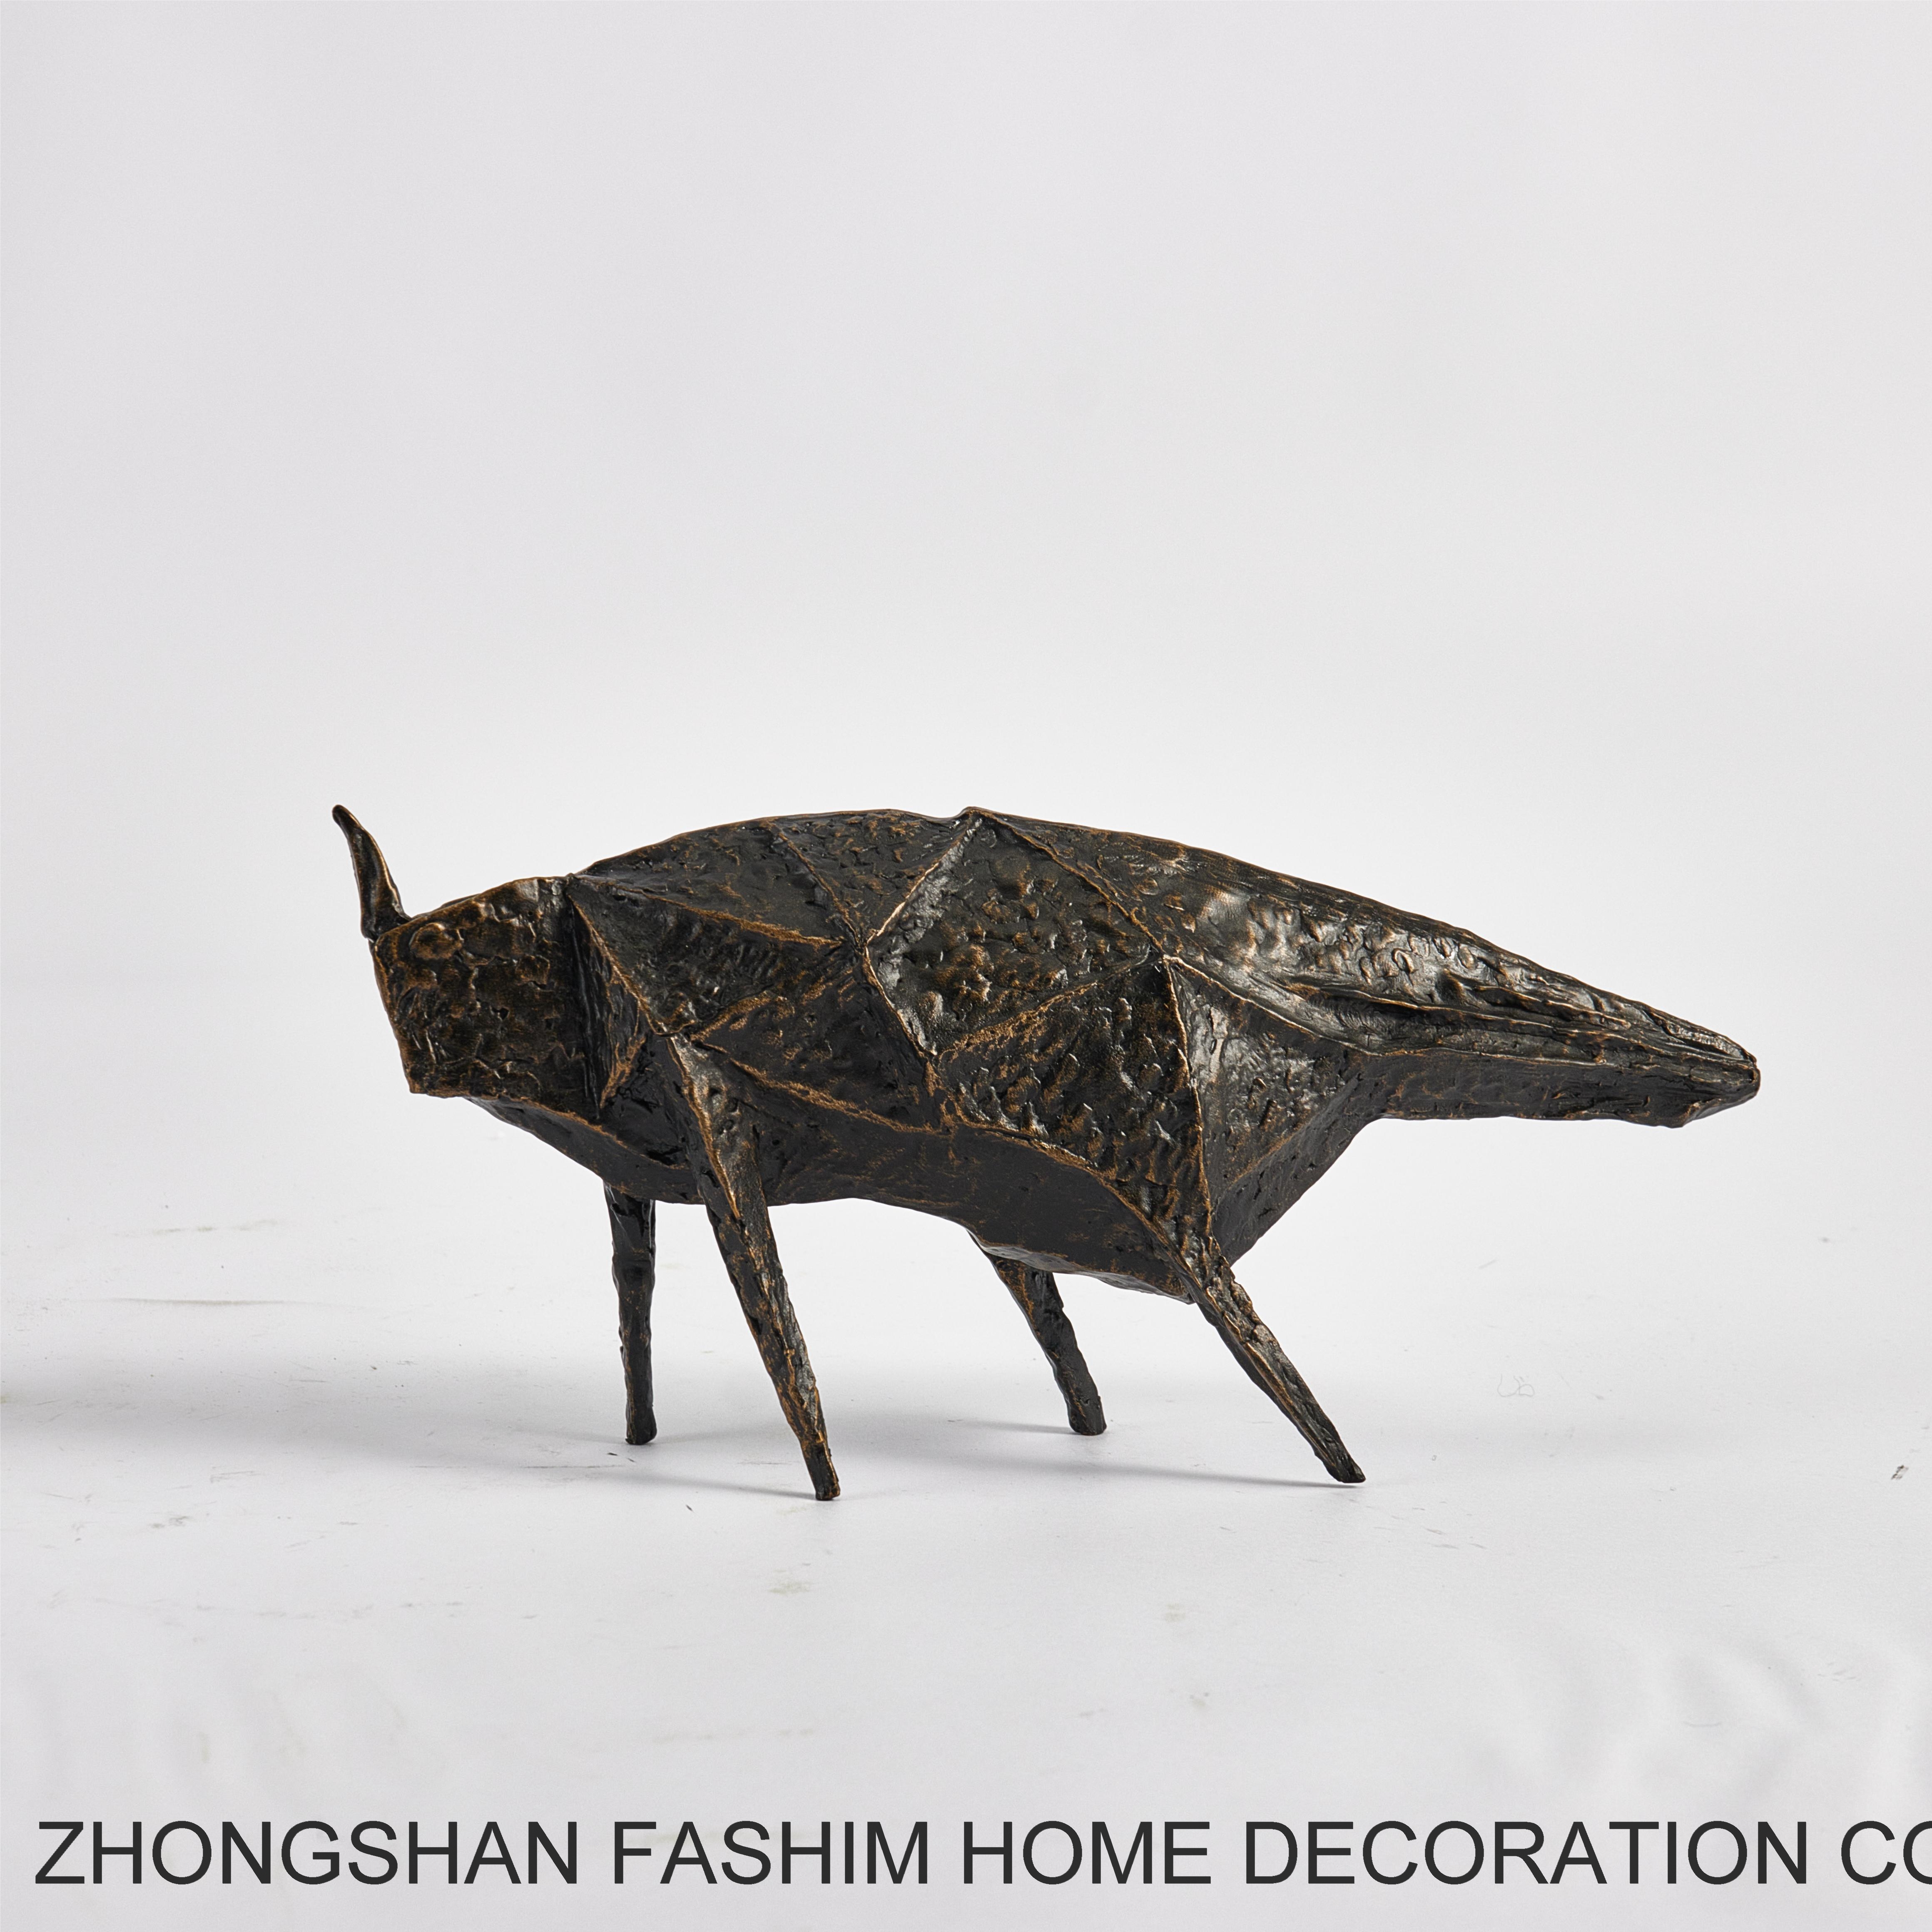 Fashimdecor Metal Insect Sculpture